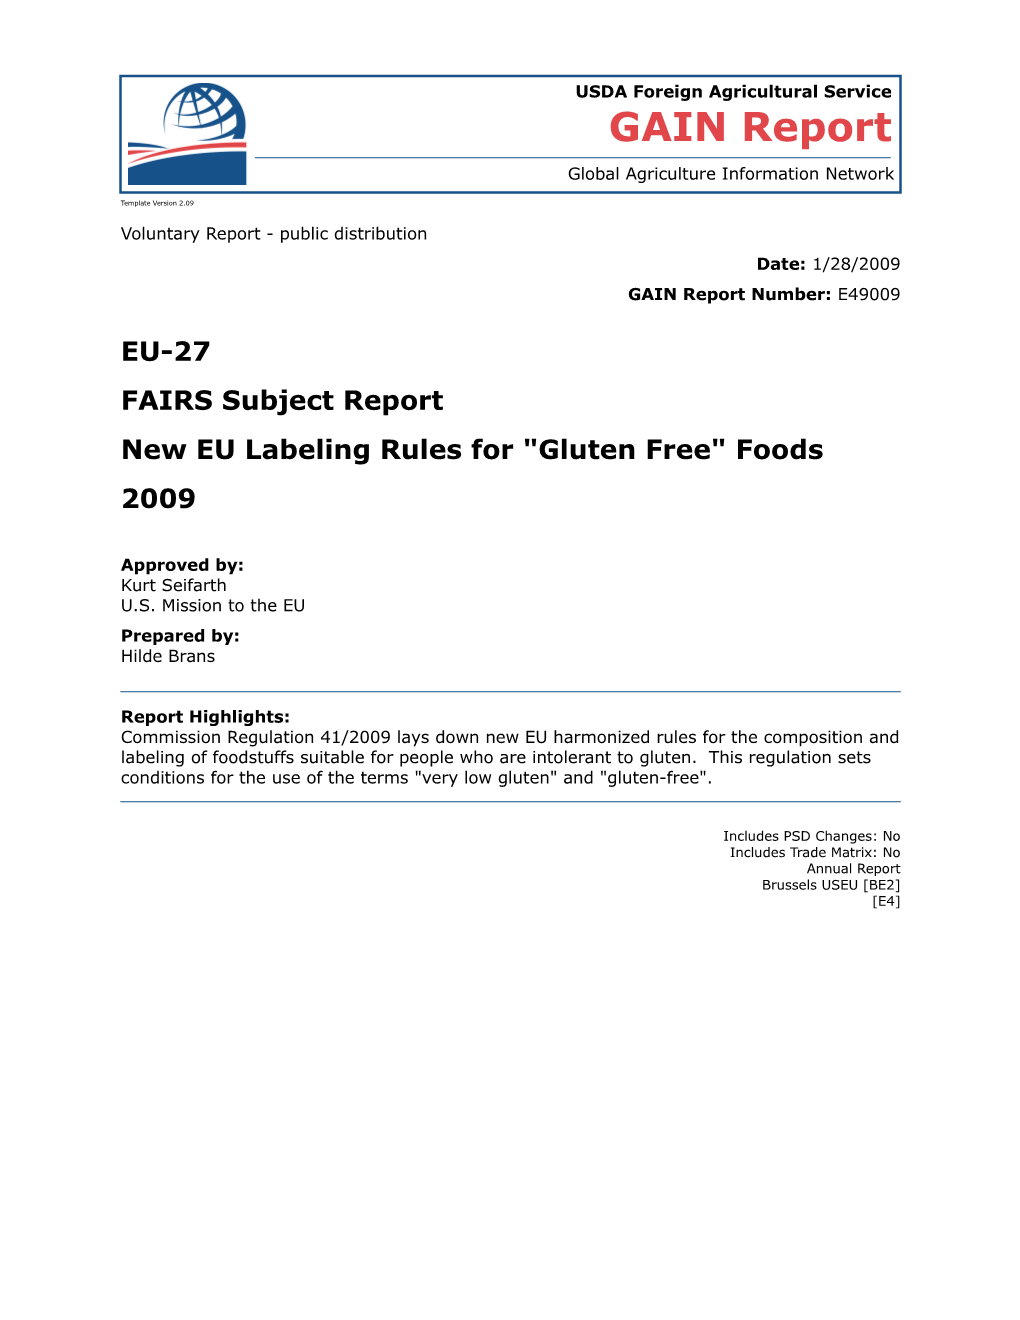 New EU Labeling Rules for Gluten Free Foods